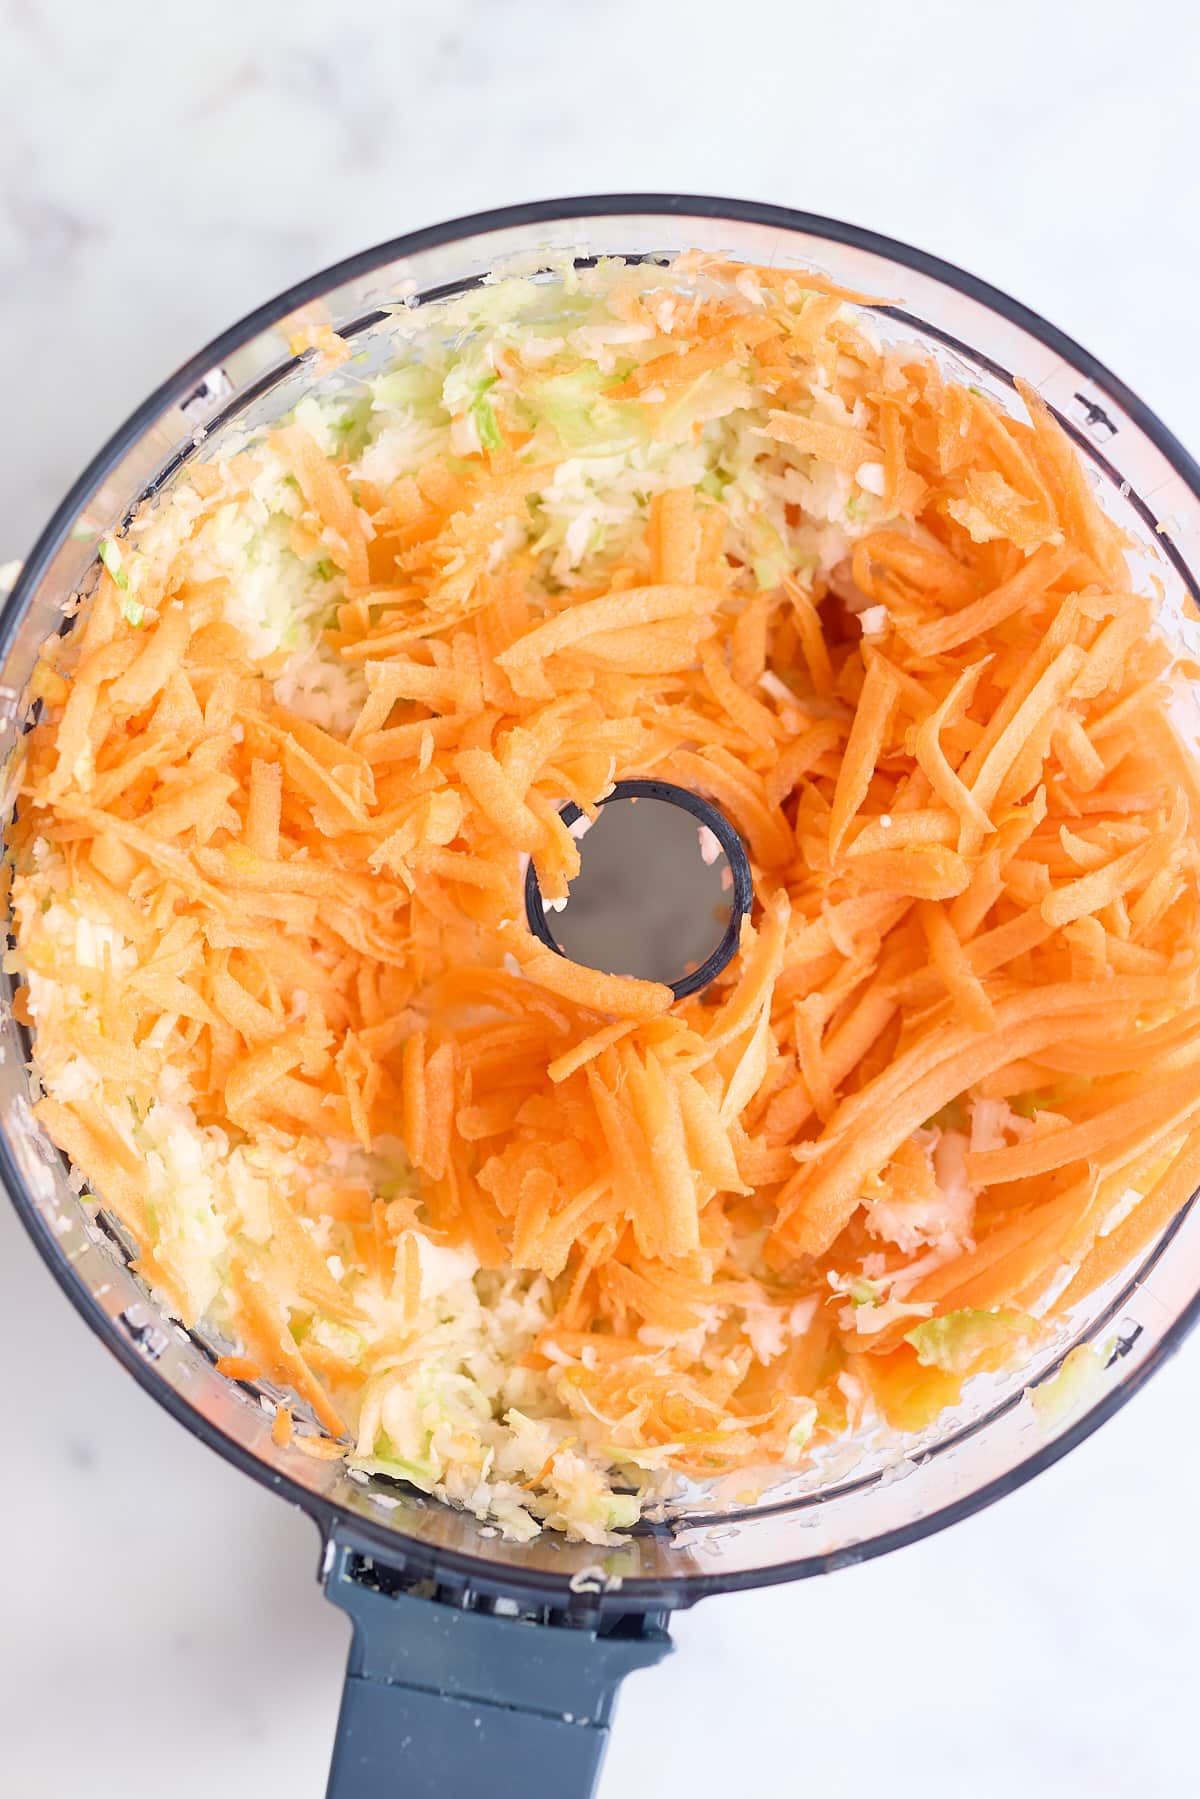 cabbage, carrots and pepper shredded in a food processor.